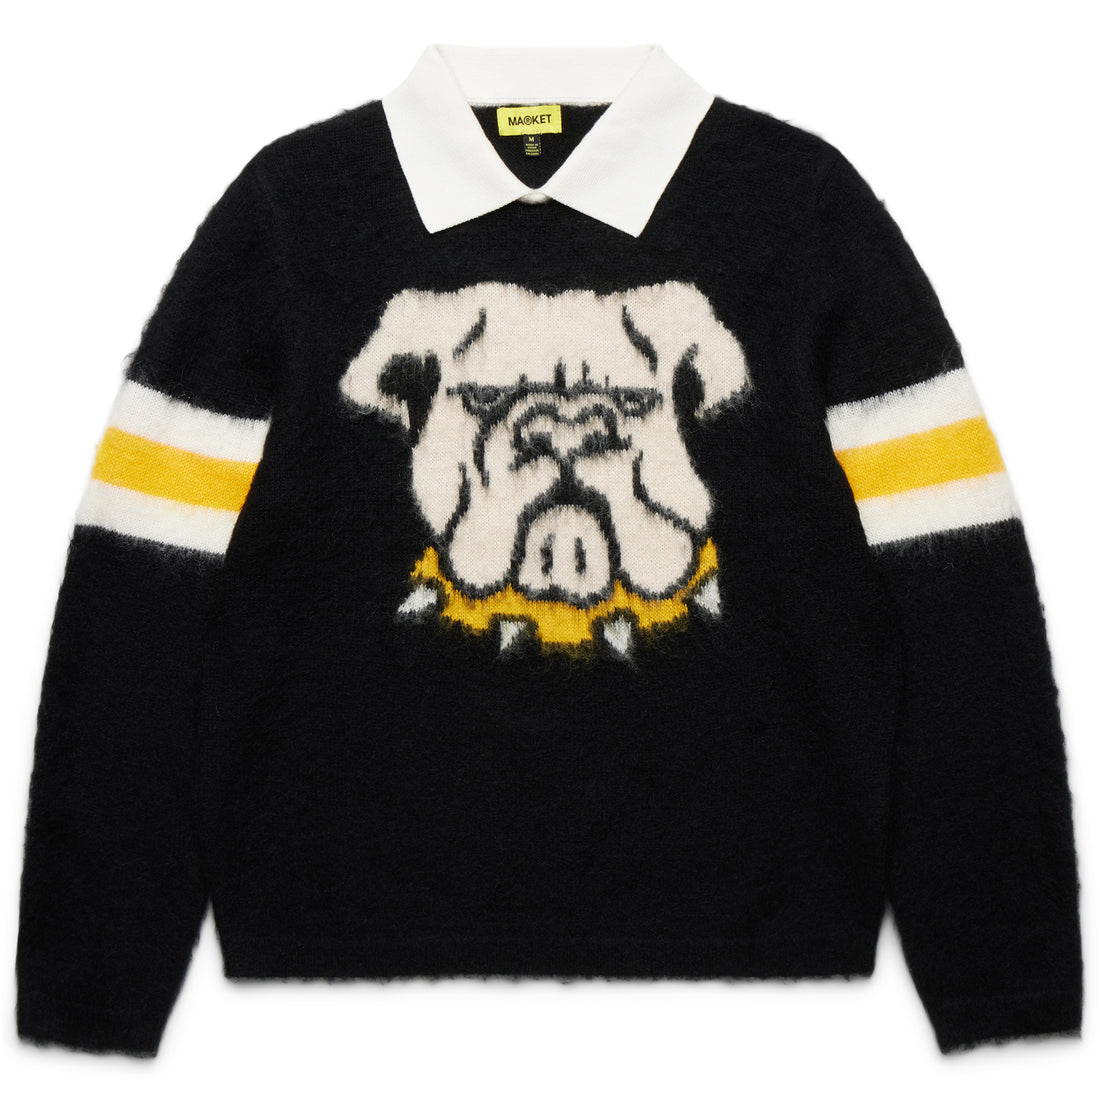 Chinatown Market Varsity Overload Knit Rugby